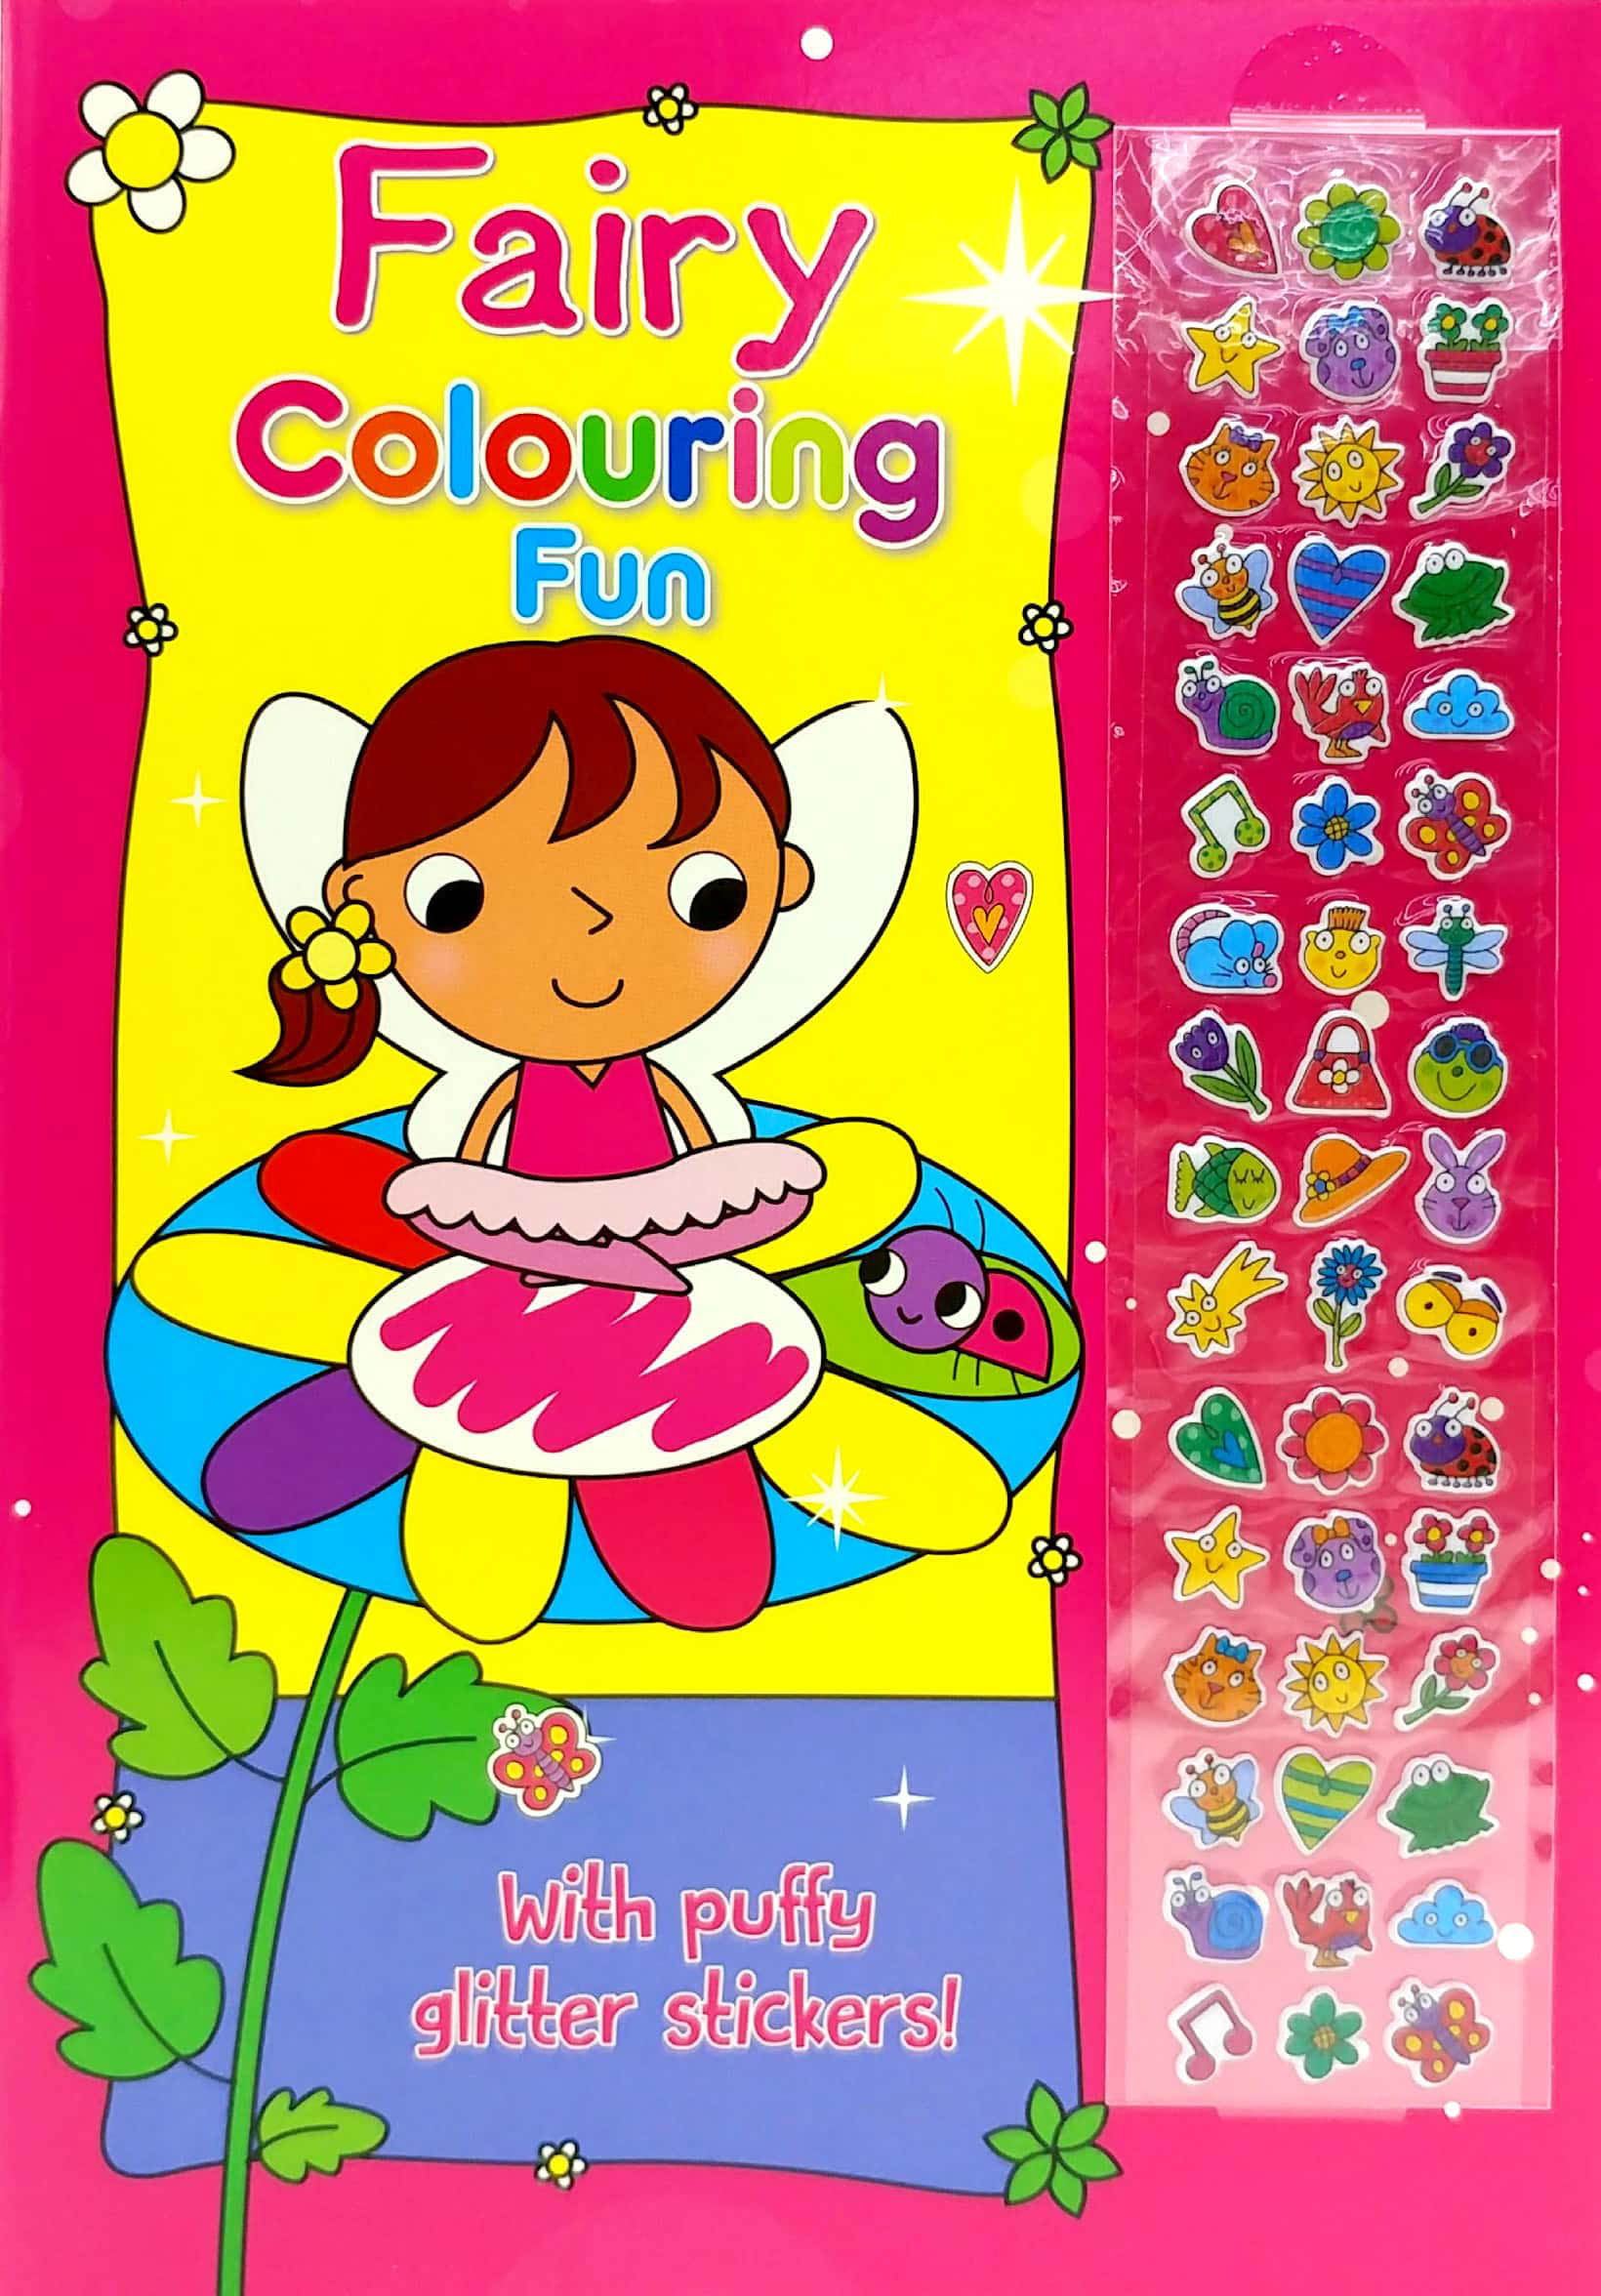 Fairy Colouring Fun with Puffy Glitter Stickers